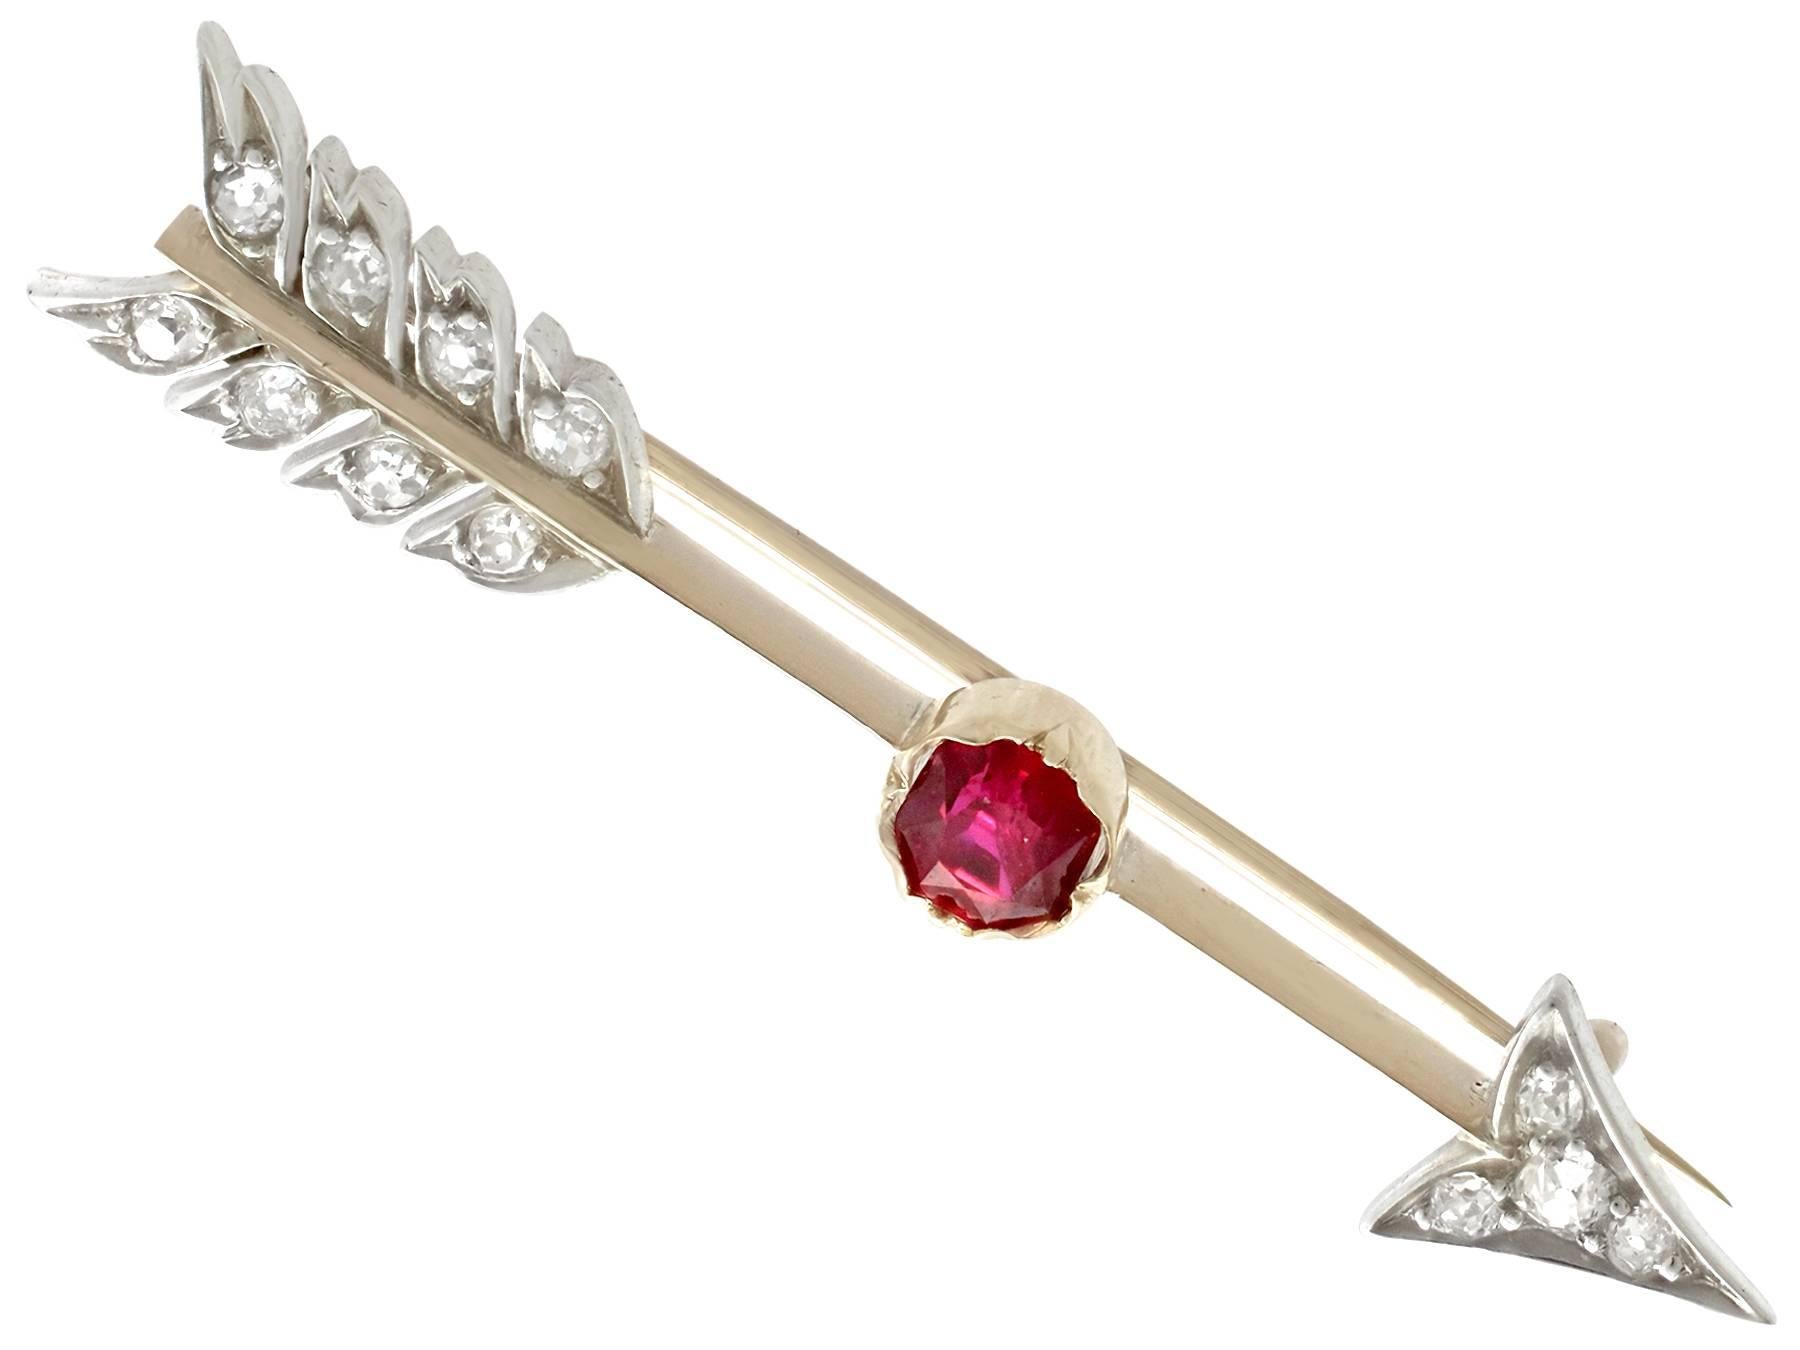 An impressive antique Victorian 0.82 carat ruby and 0.26 carat diamond, 15 karat yellow gold and silver set 'arrow' brooch; part of our diverse ruby jewellery collections.

This fine and impressive Victorian arrow brooch has been crafted in 15k